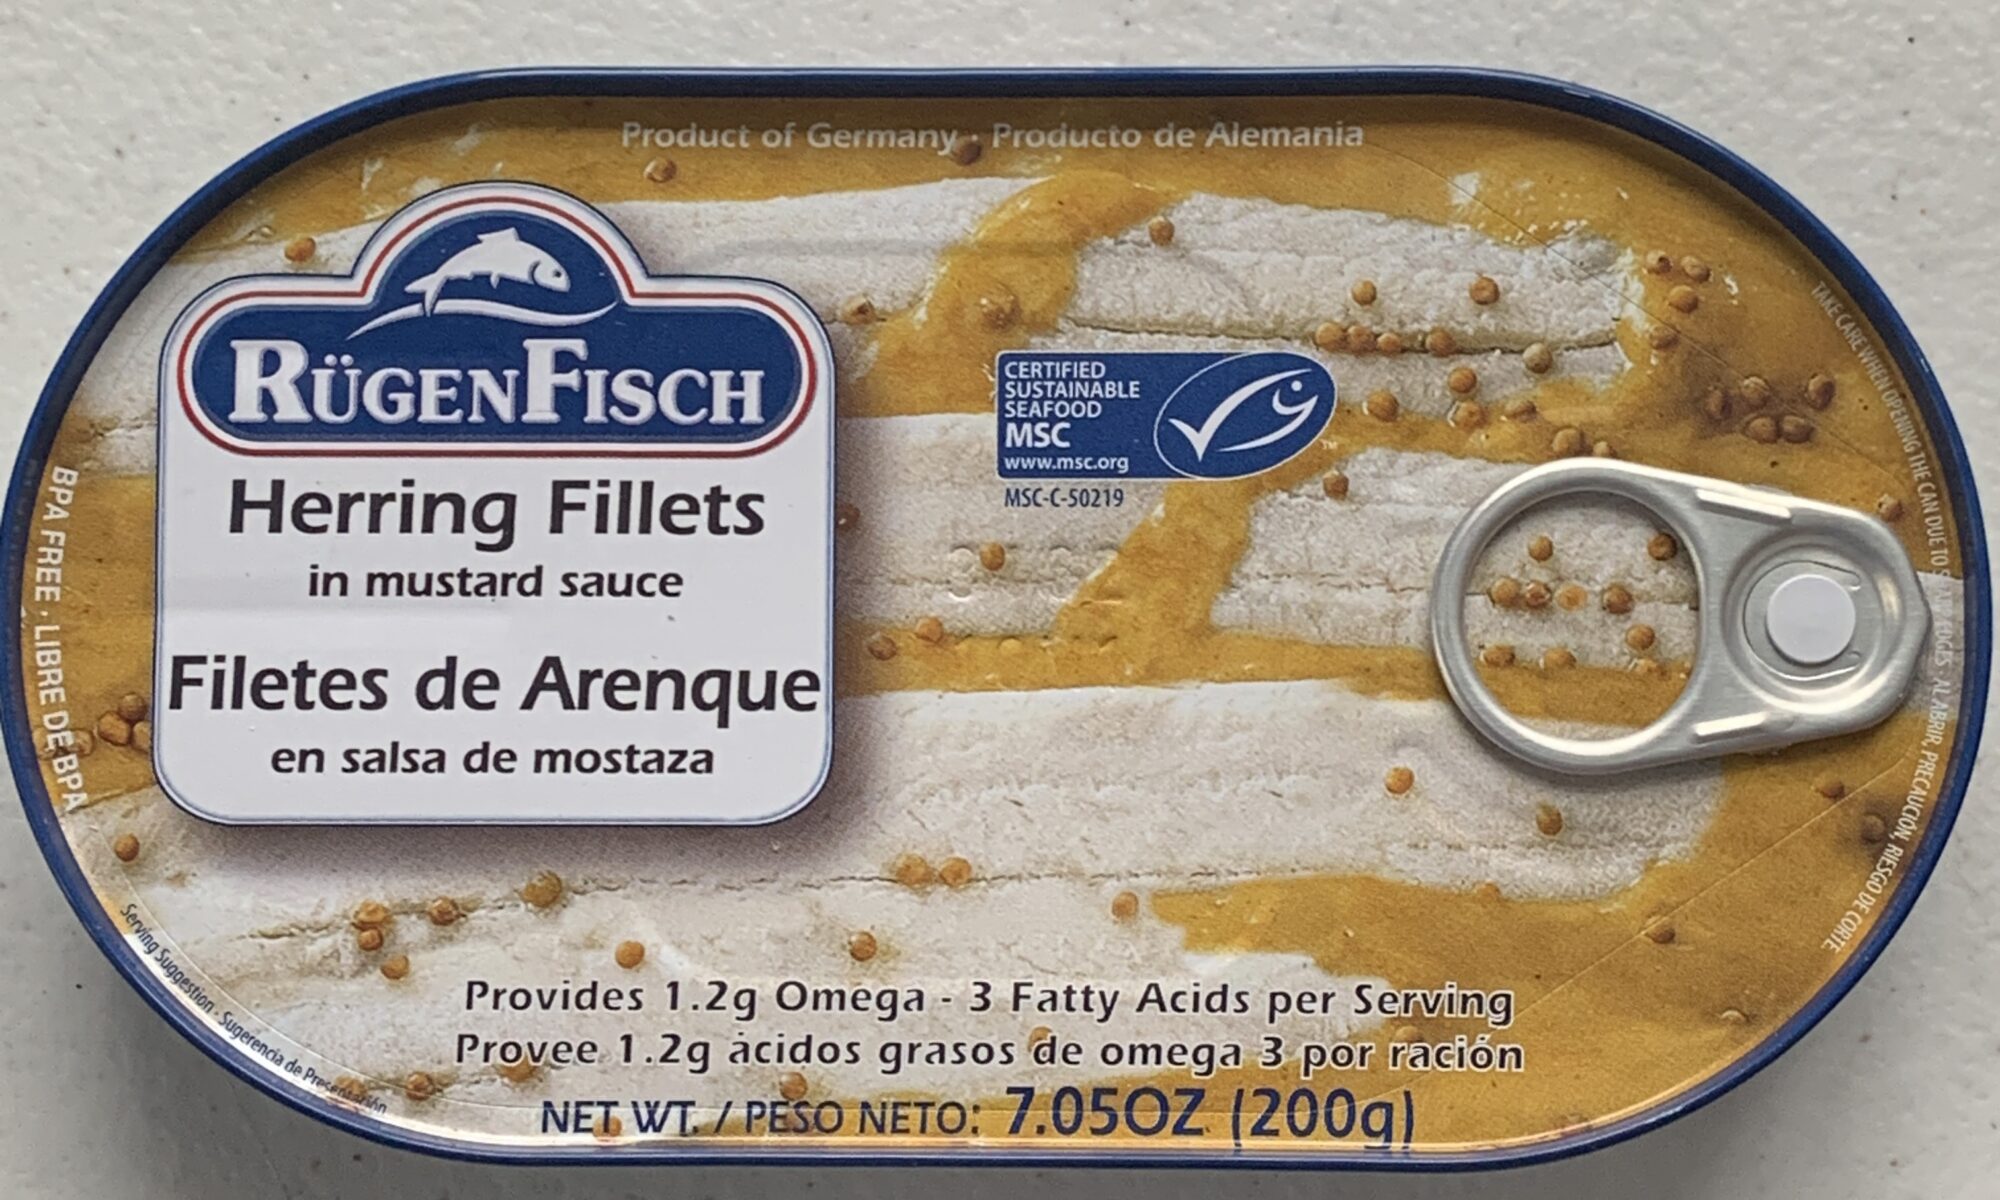 Image of the front of a tin of Rügen Fisch Herring Fillets in Mustard Sauce